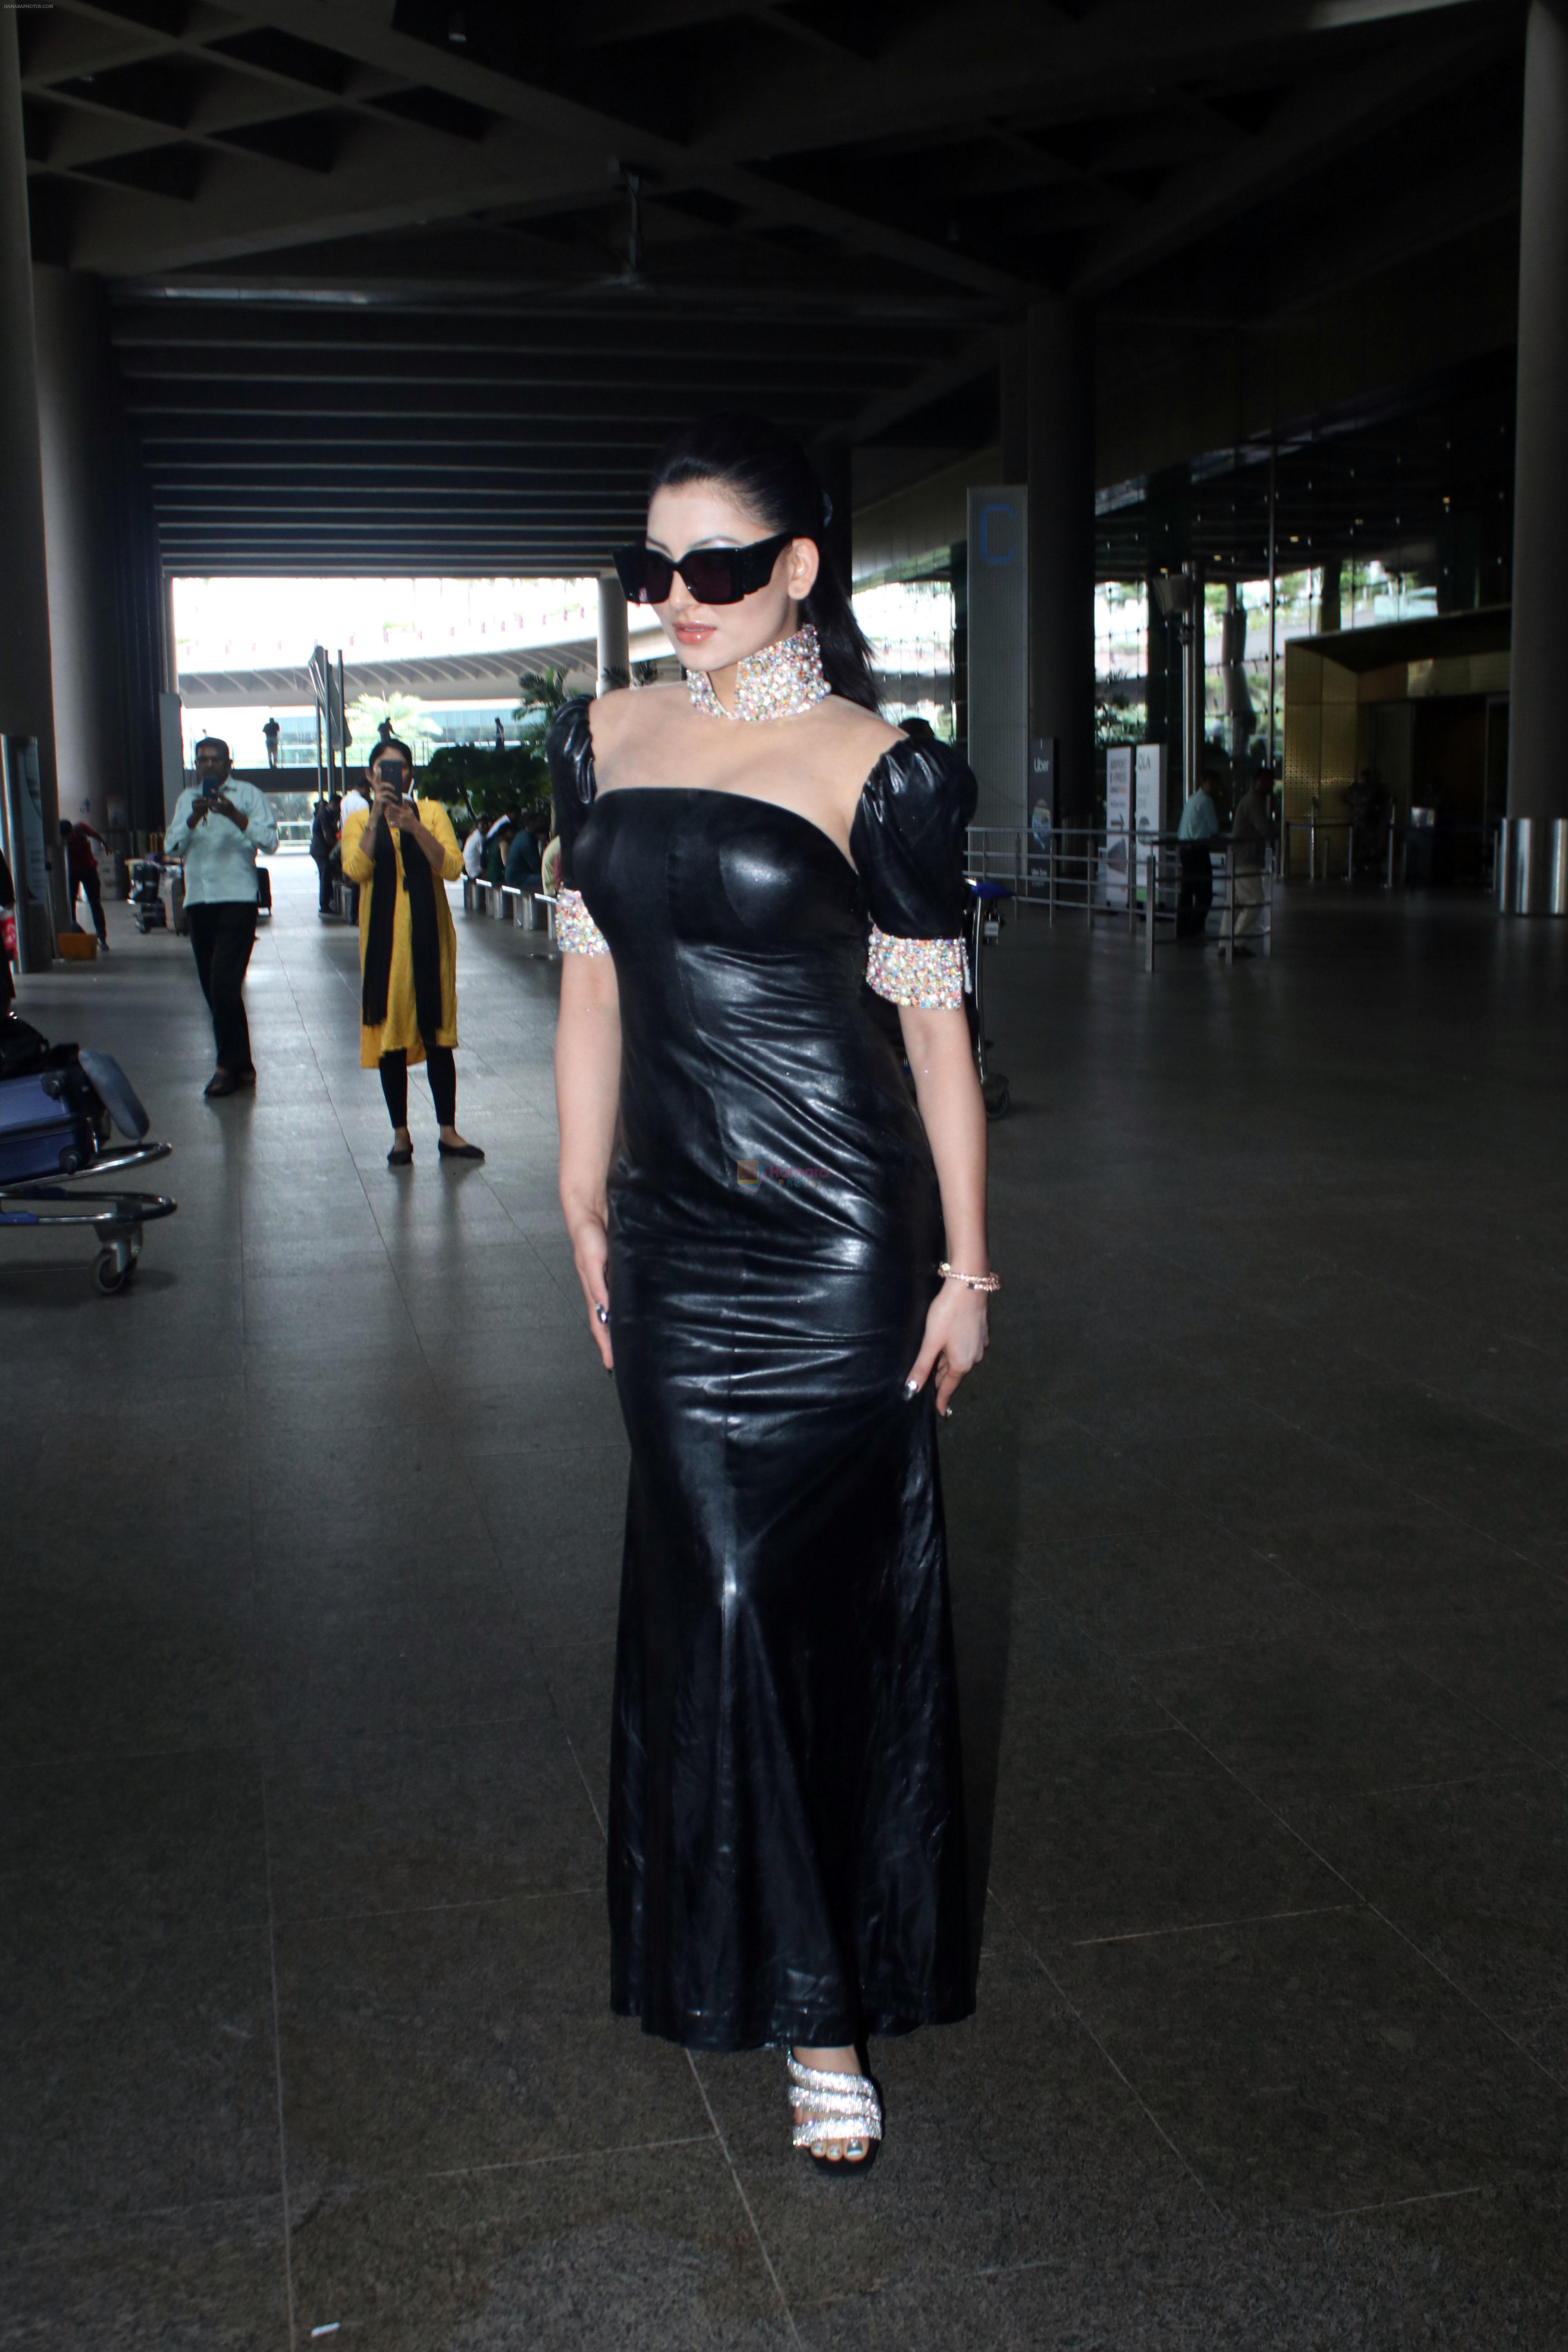 Urvashi Rautela dressed in Black seen at the airport on 13 July 2023